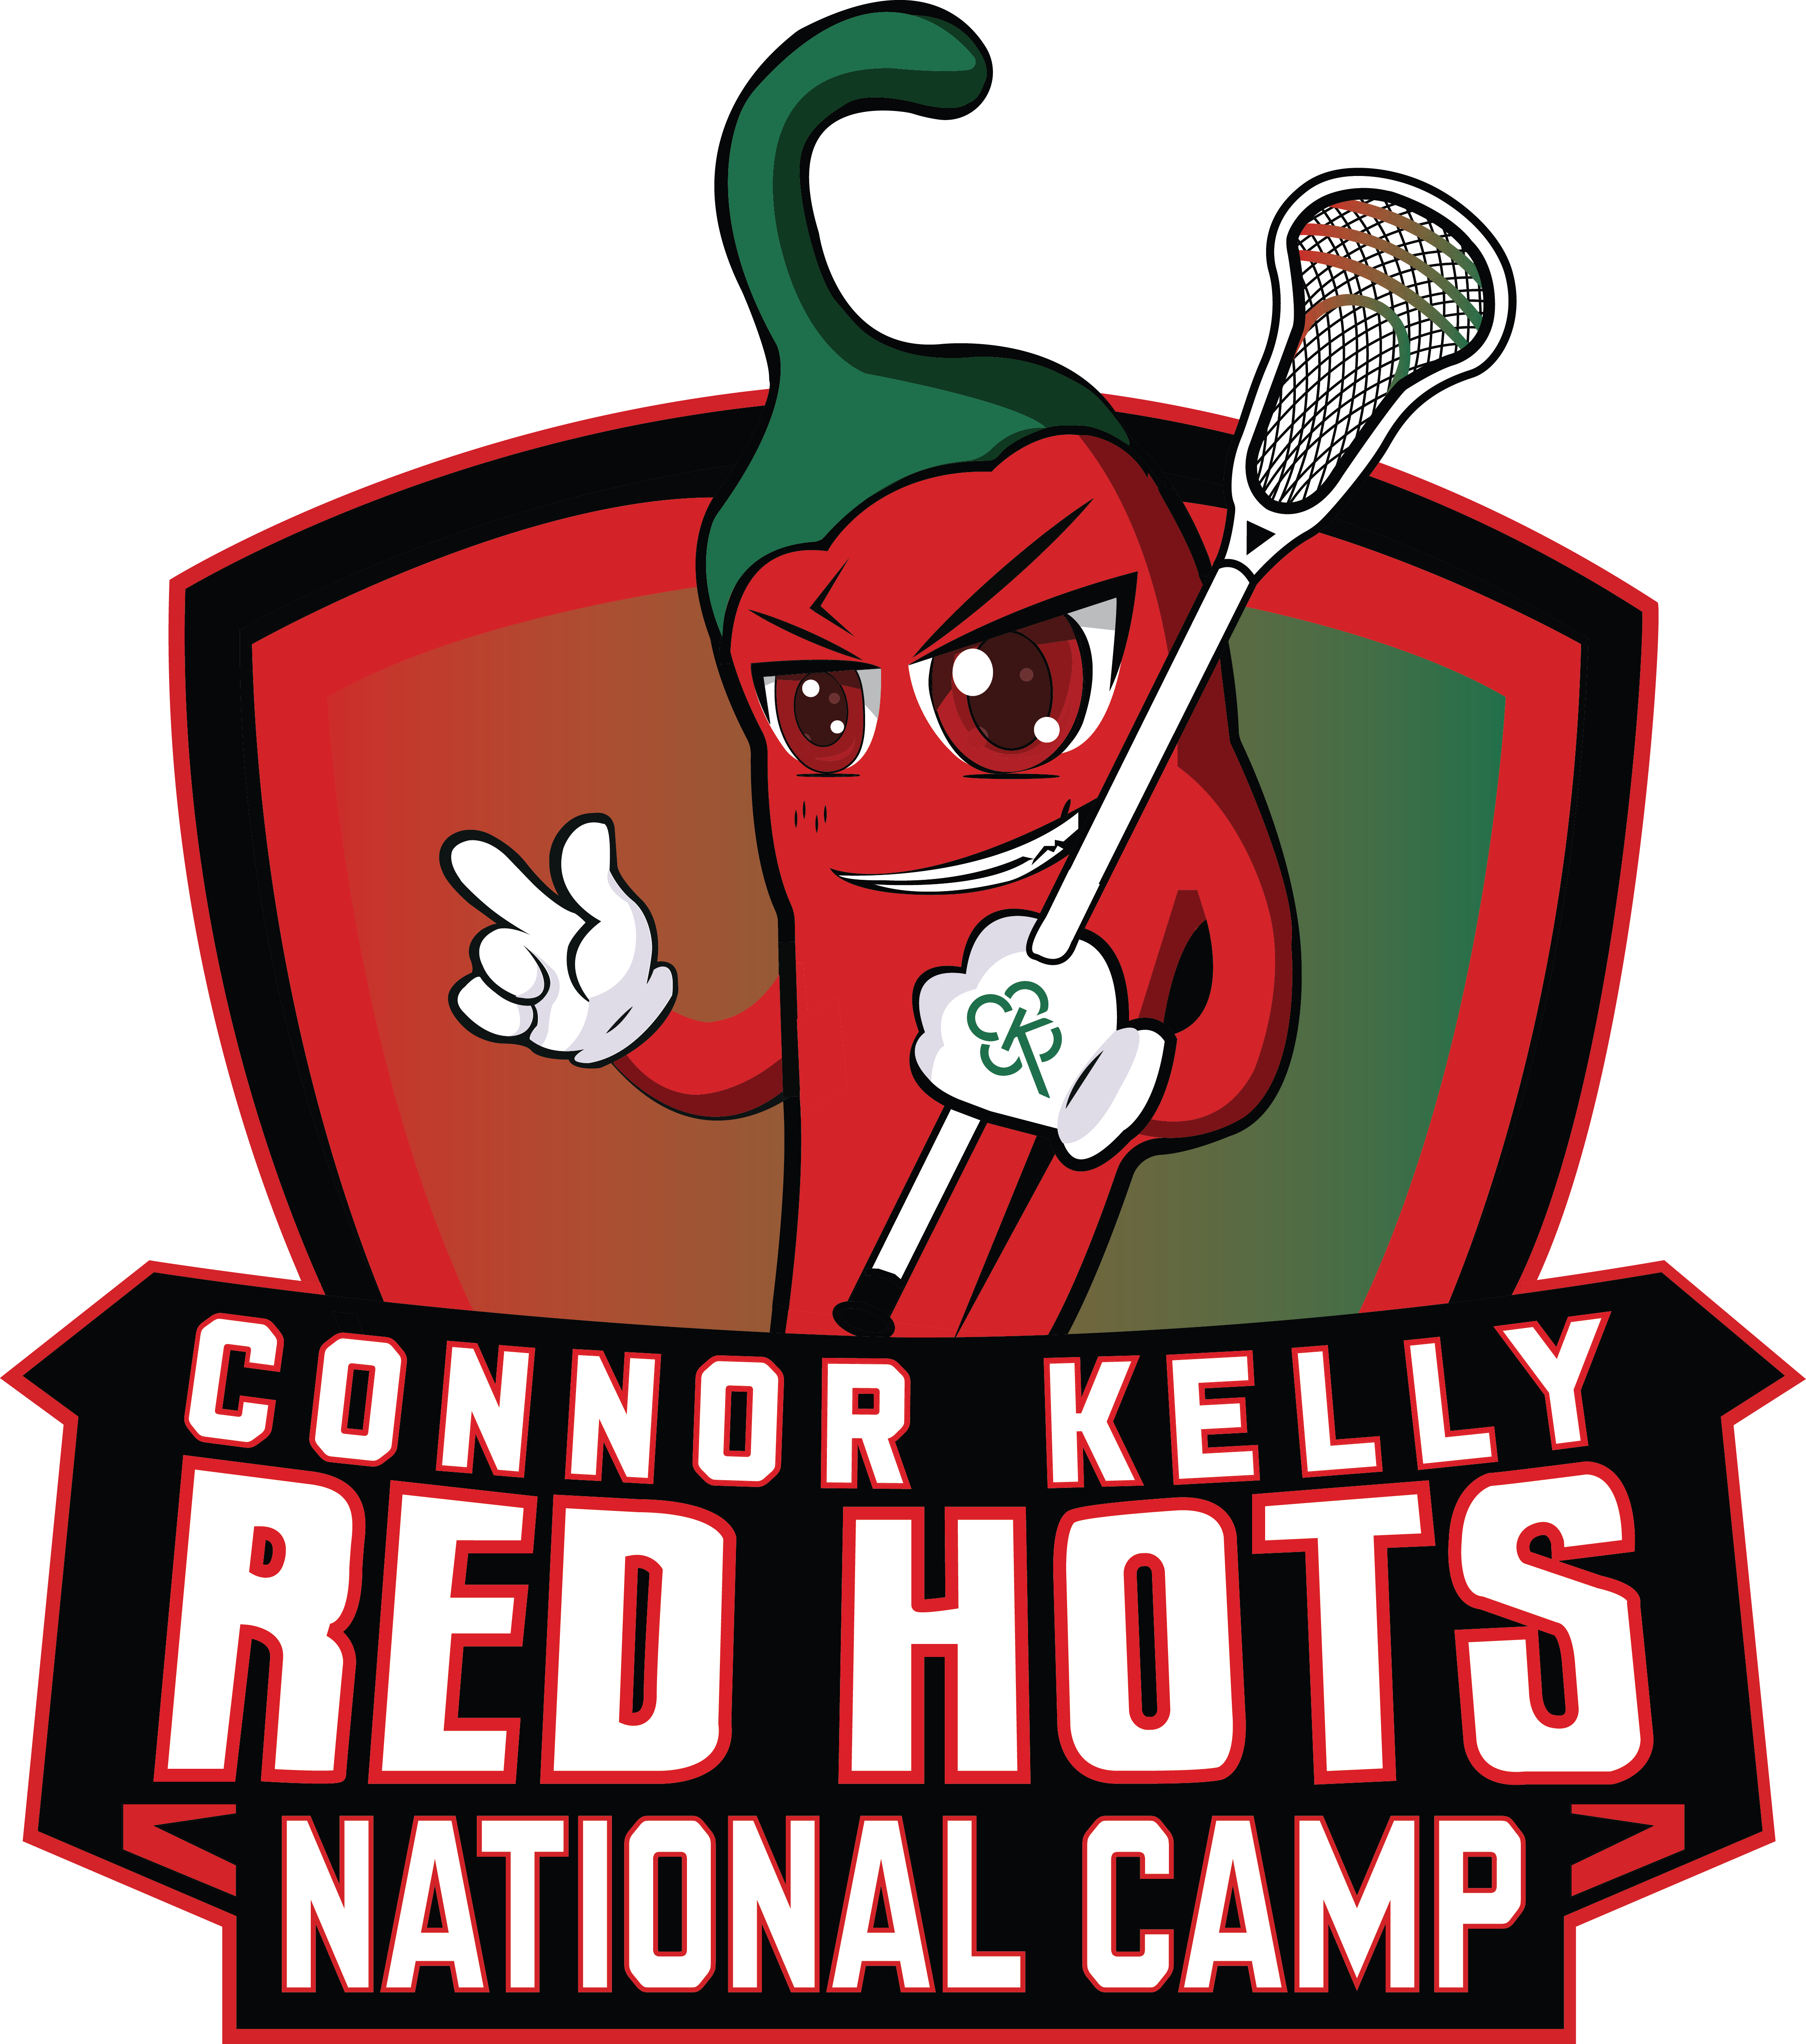 Connor Kelly Red Hots National Camp: The Hill School